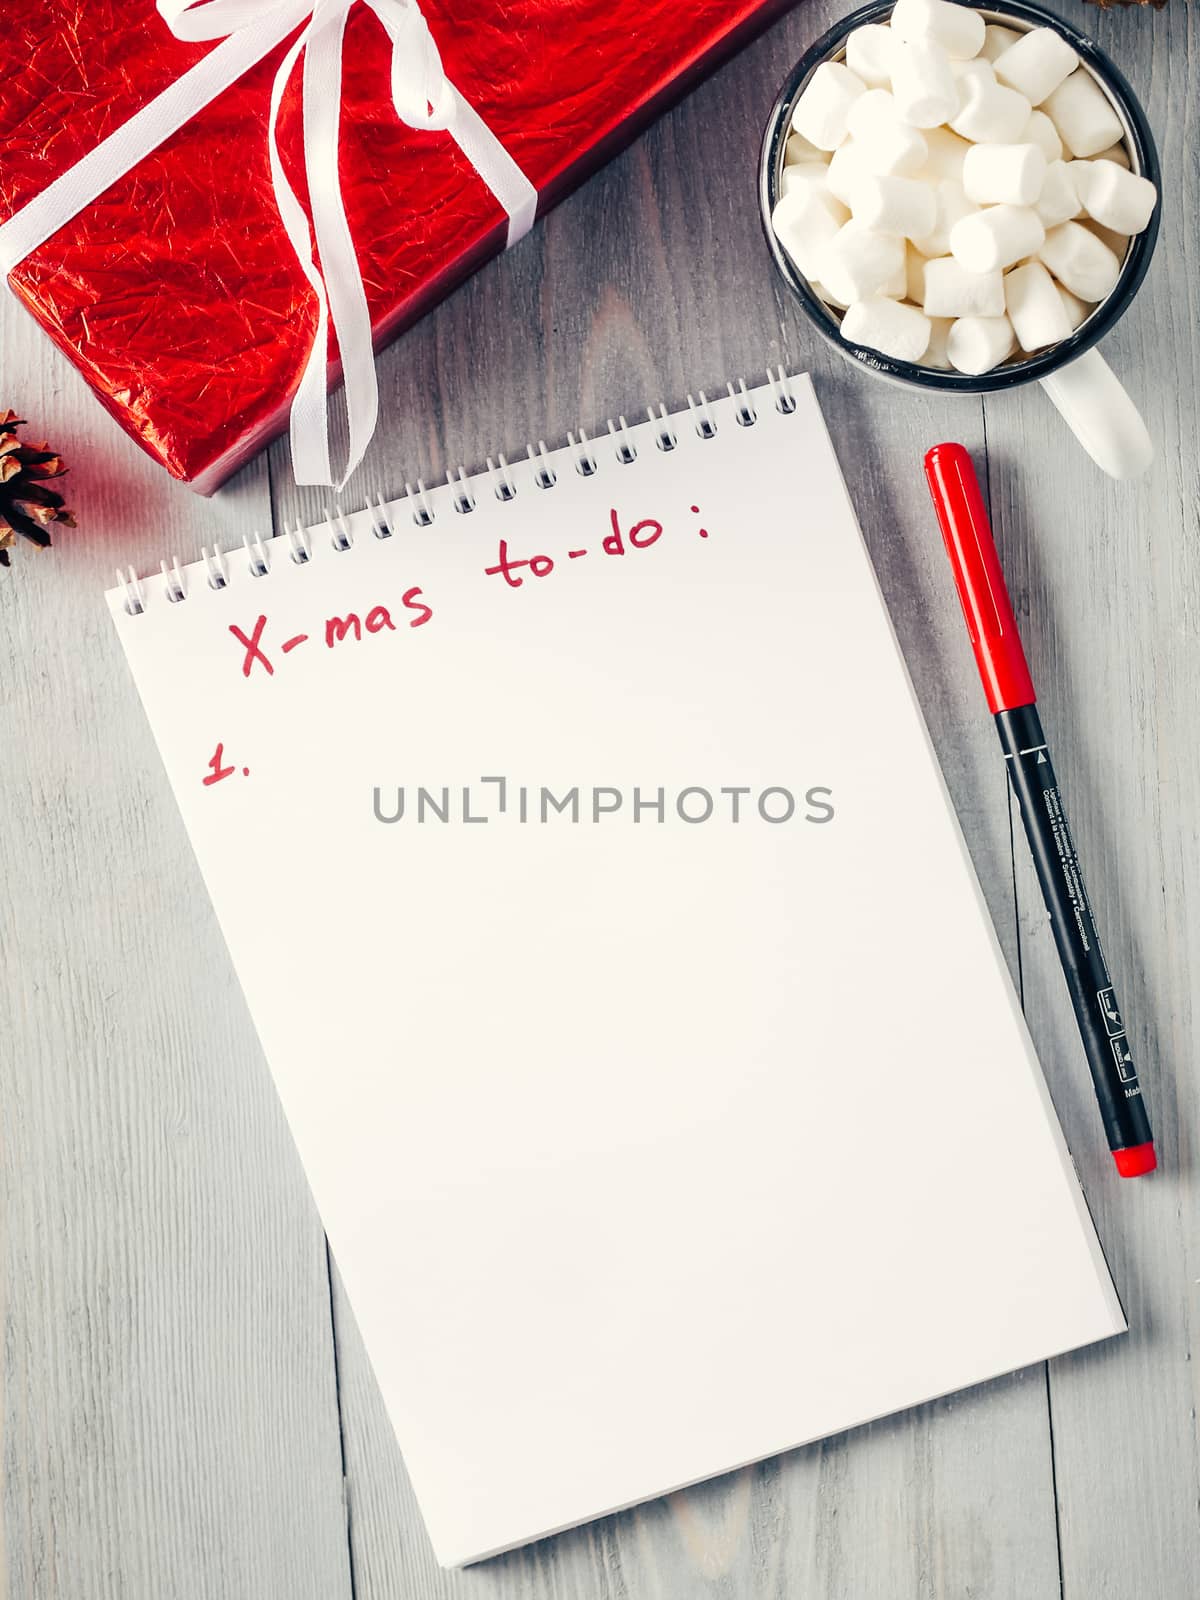 Christmas gifts shopping planning list by fascinadora